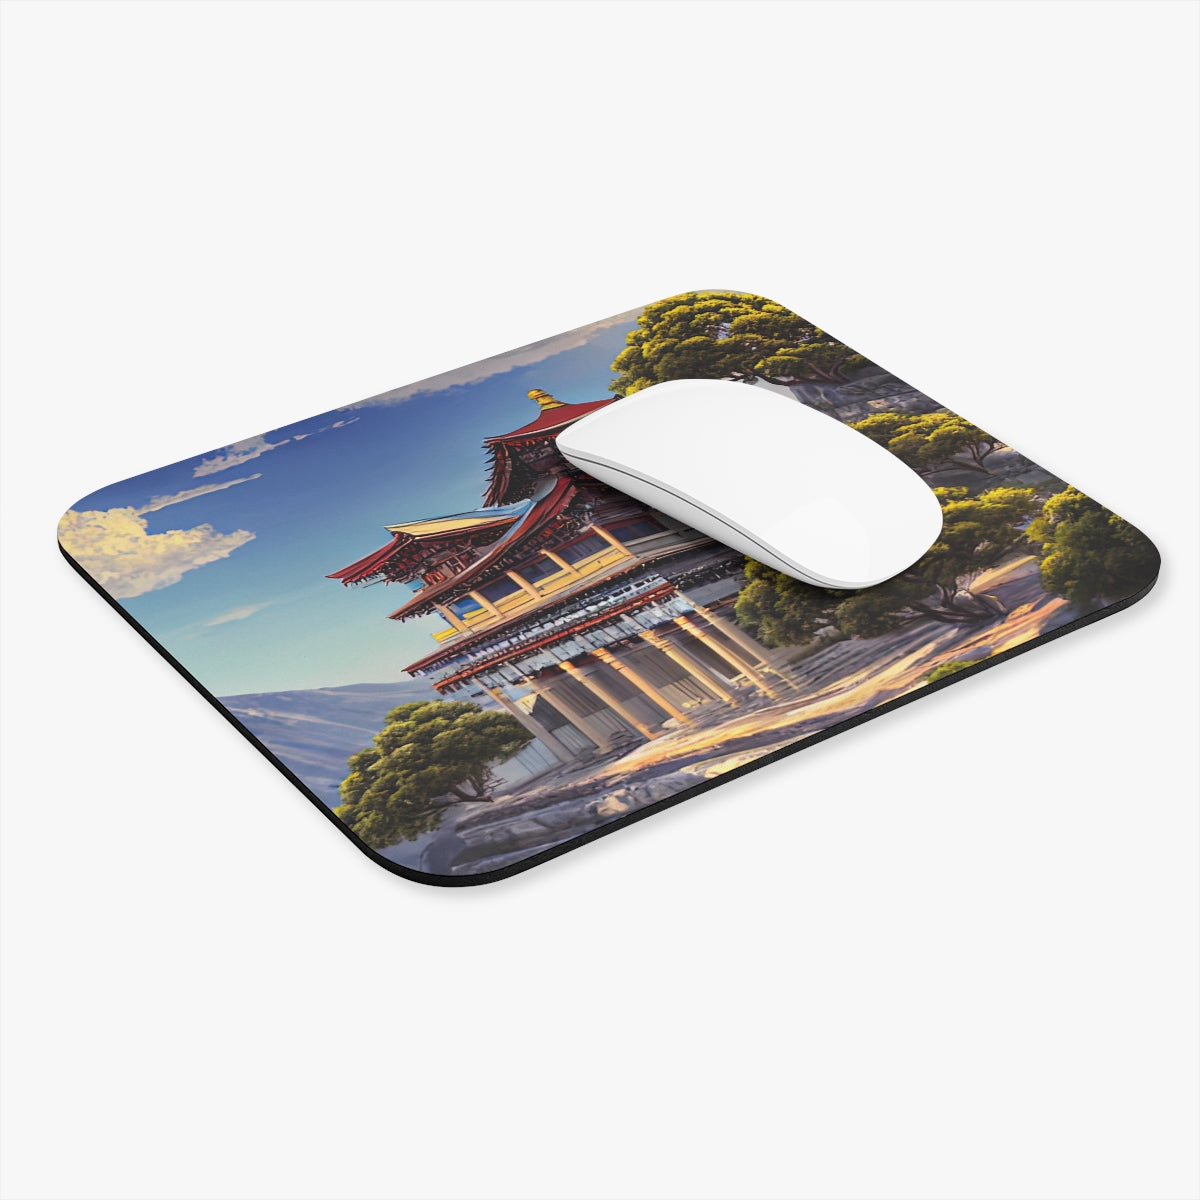 Mouse Pad | Abandoned Temple (Rectangle)